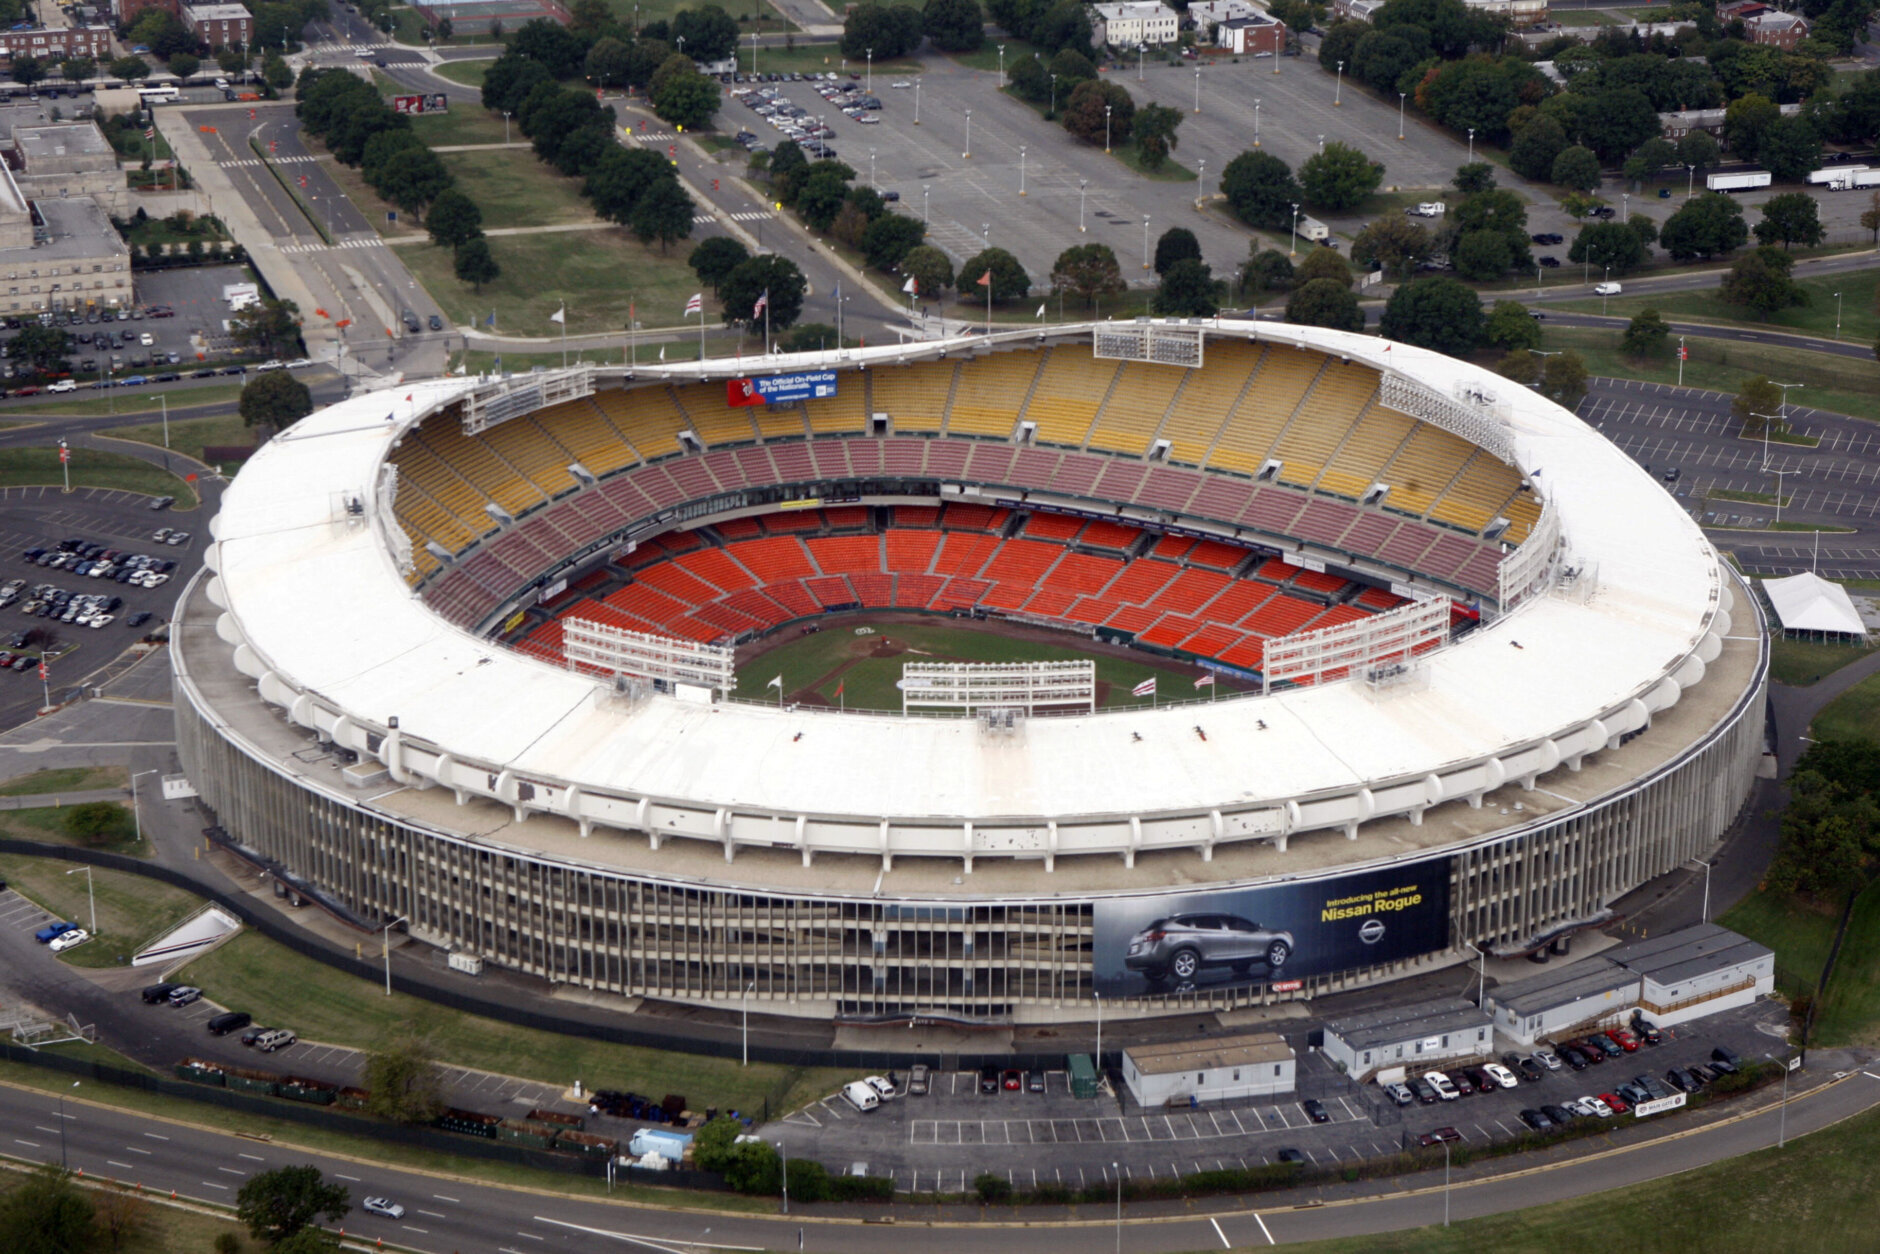 FILE - This Sept. 19, 2017, file photo, shows an aerial view of RFK Stadium in Washington. D.C. United will play their final MLS soccer game at RFK Stadium on Sunday. The United have already been eliminated from the playoffs, but they hope to say goodbye to the historic venue with a victory over the Red Bulls. (AP Photo/Charles Dharapak, File)